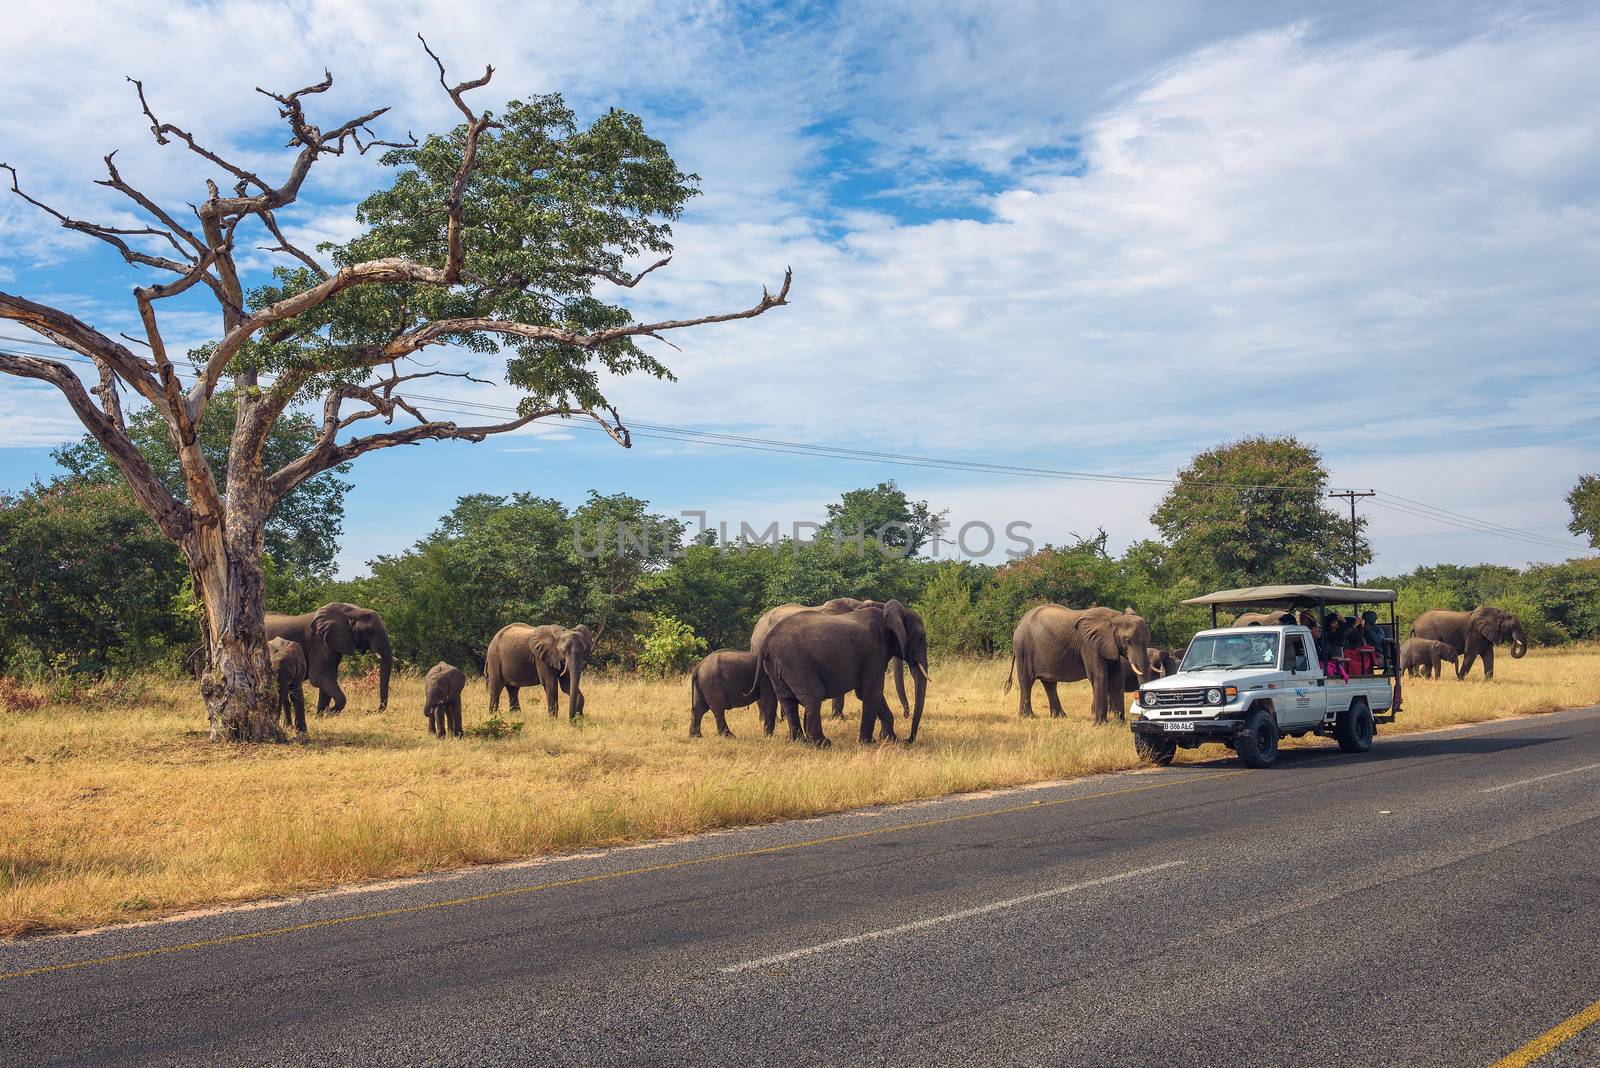 Herd of elephants crossing the road around a safari car in Chobe National Park by nickfox